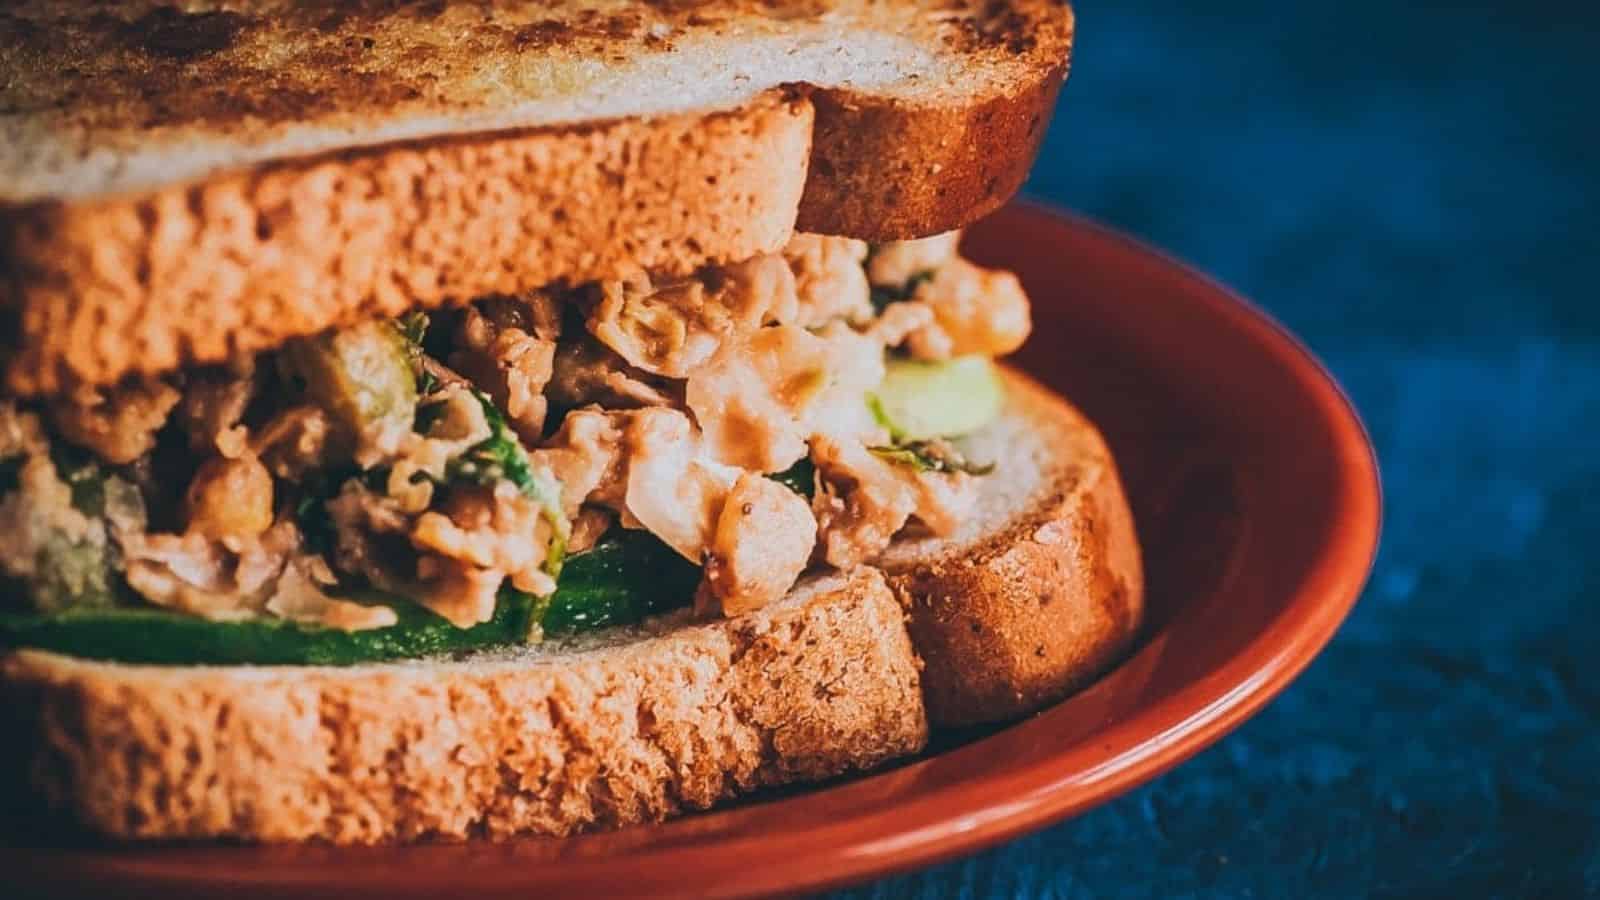 A close-up image of zesty smashed chickpea salad sandwich in a plate.